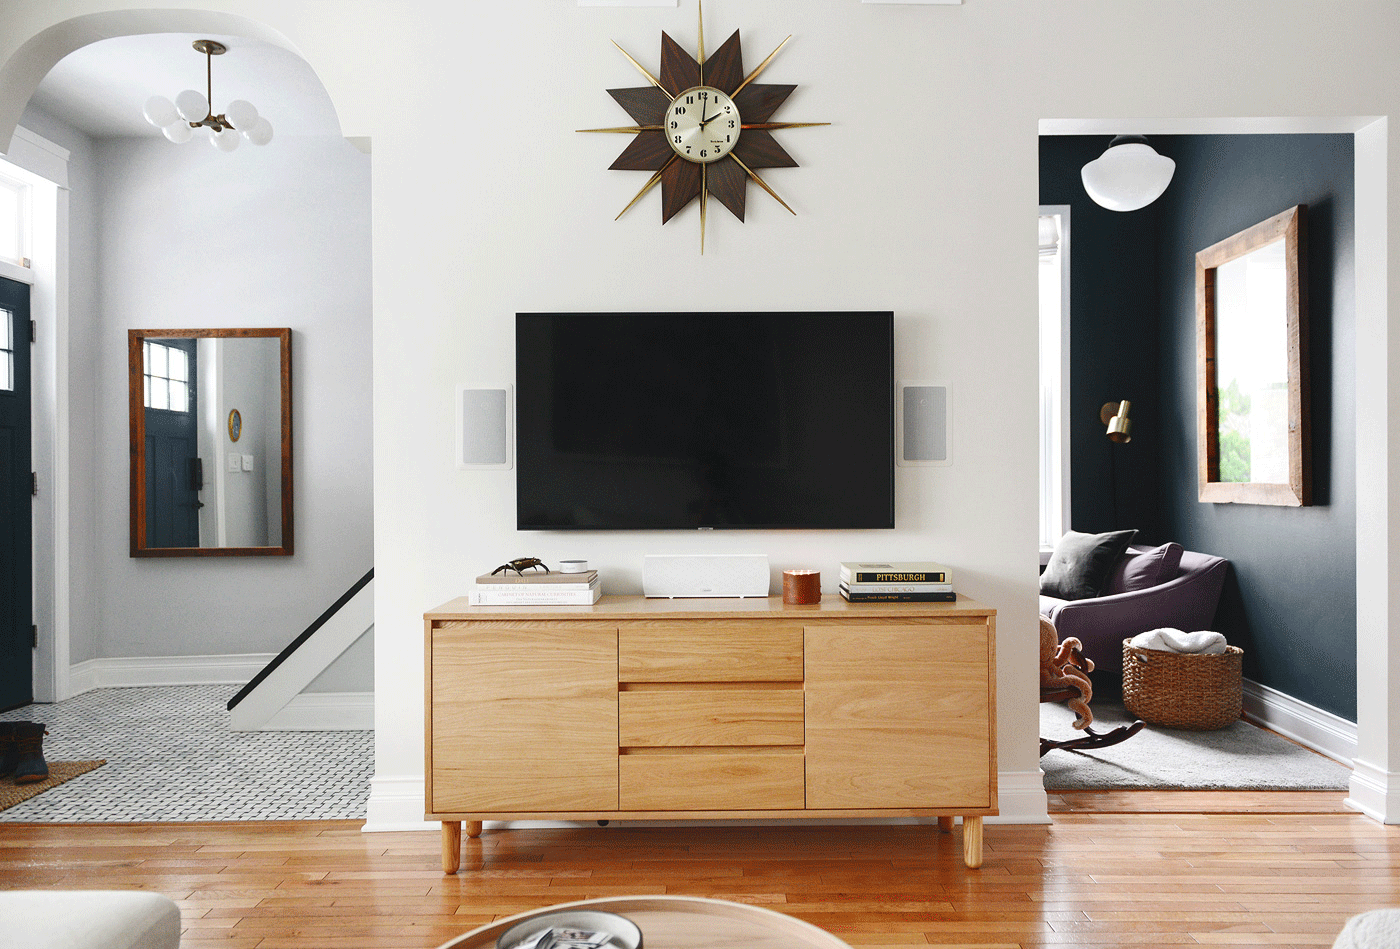 Mid century media console in neutral living room // How to keep media console organized // via Yellow Brick Home